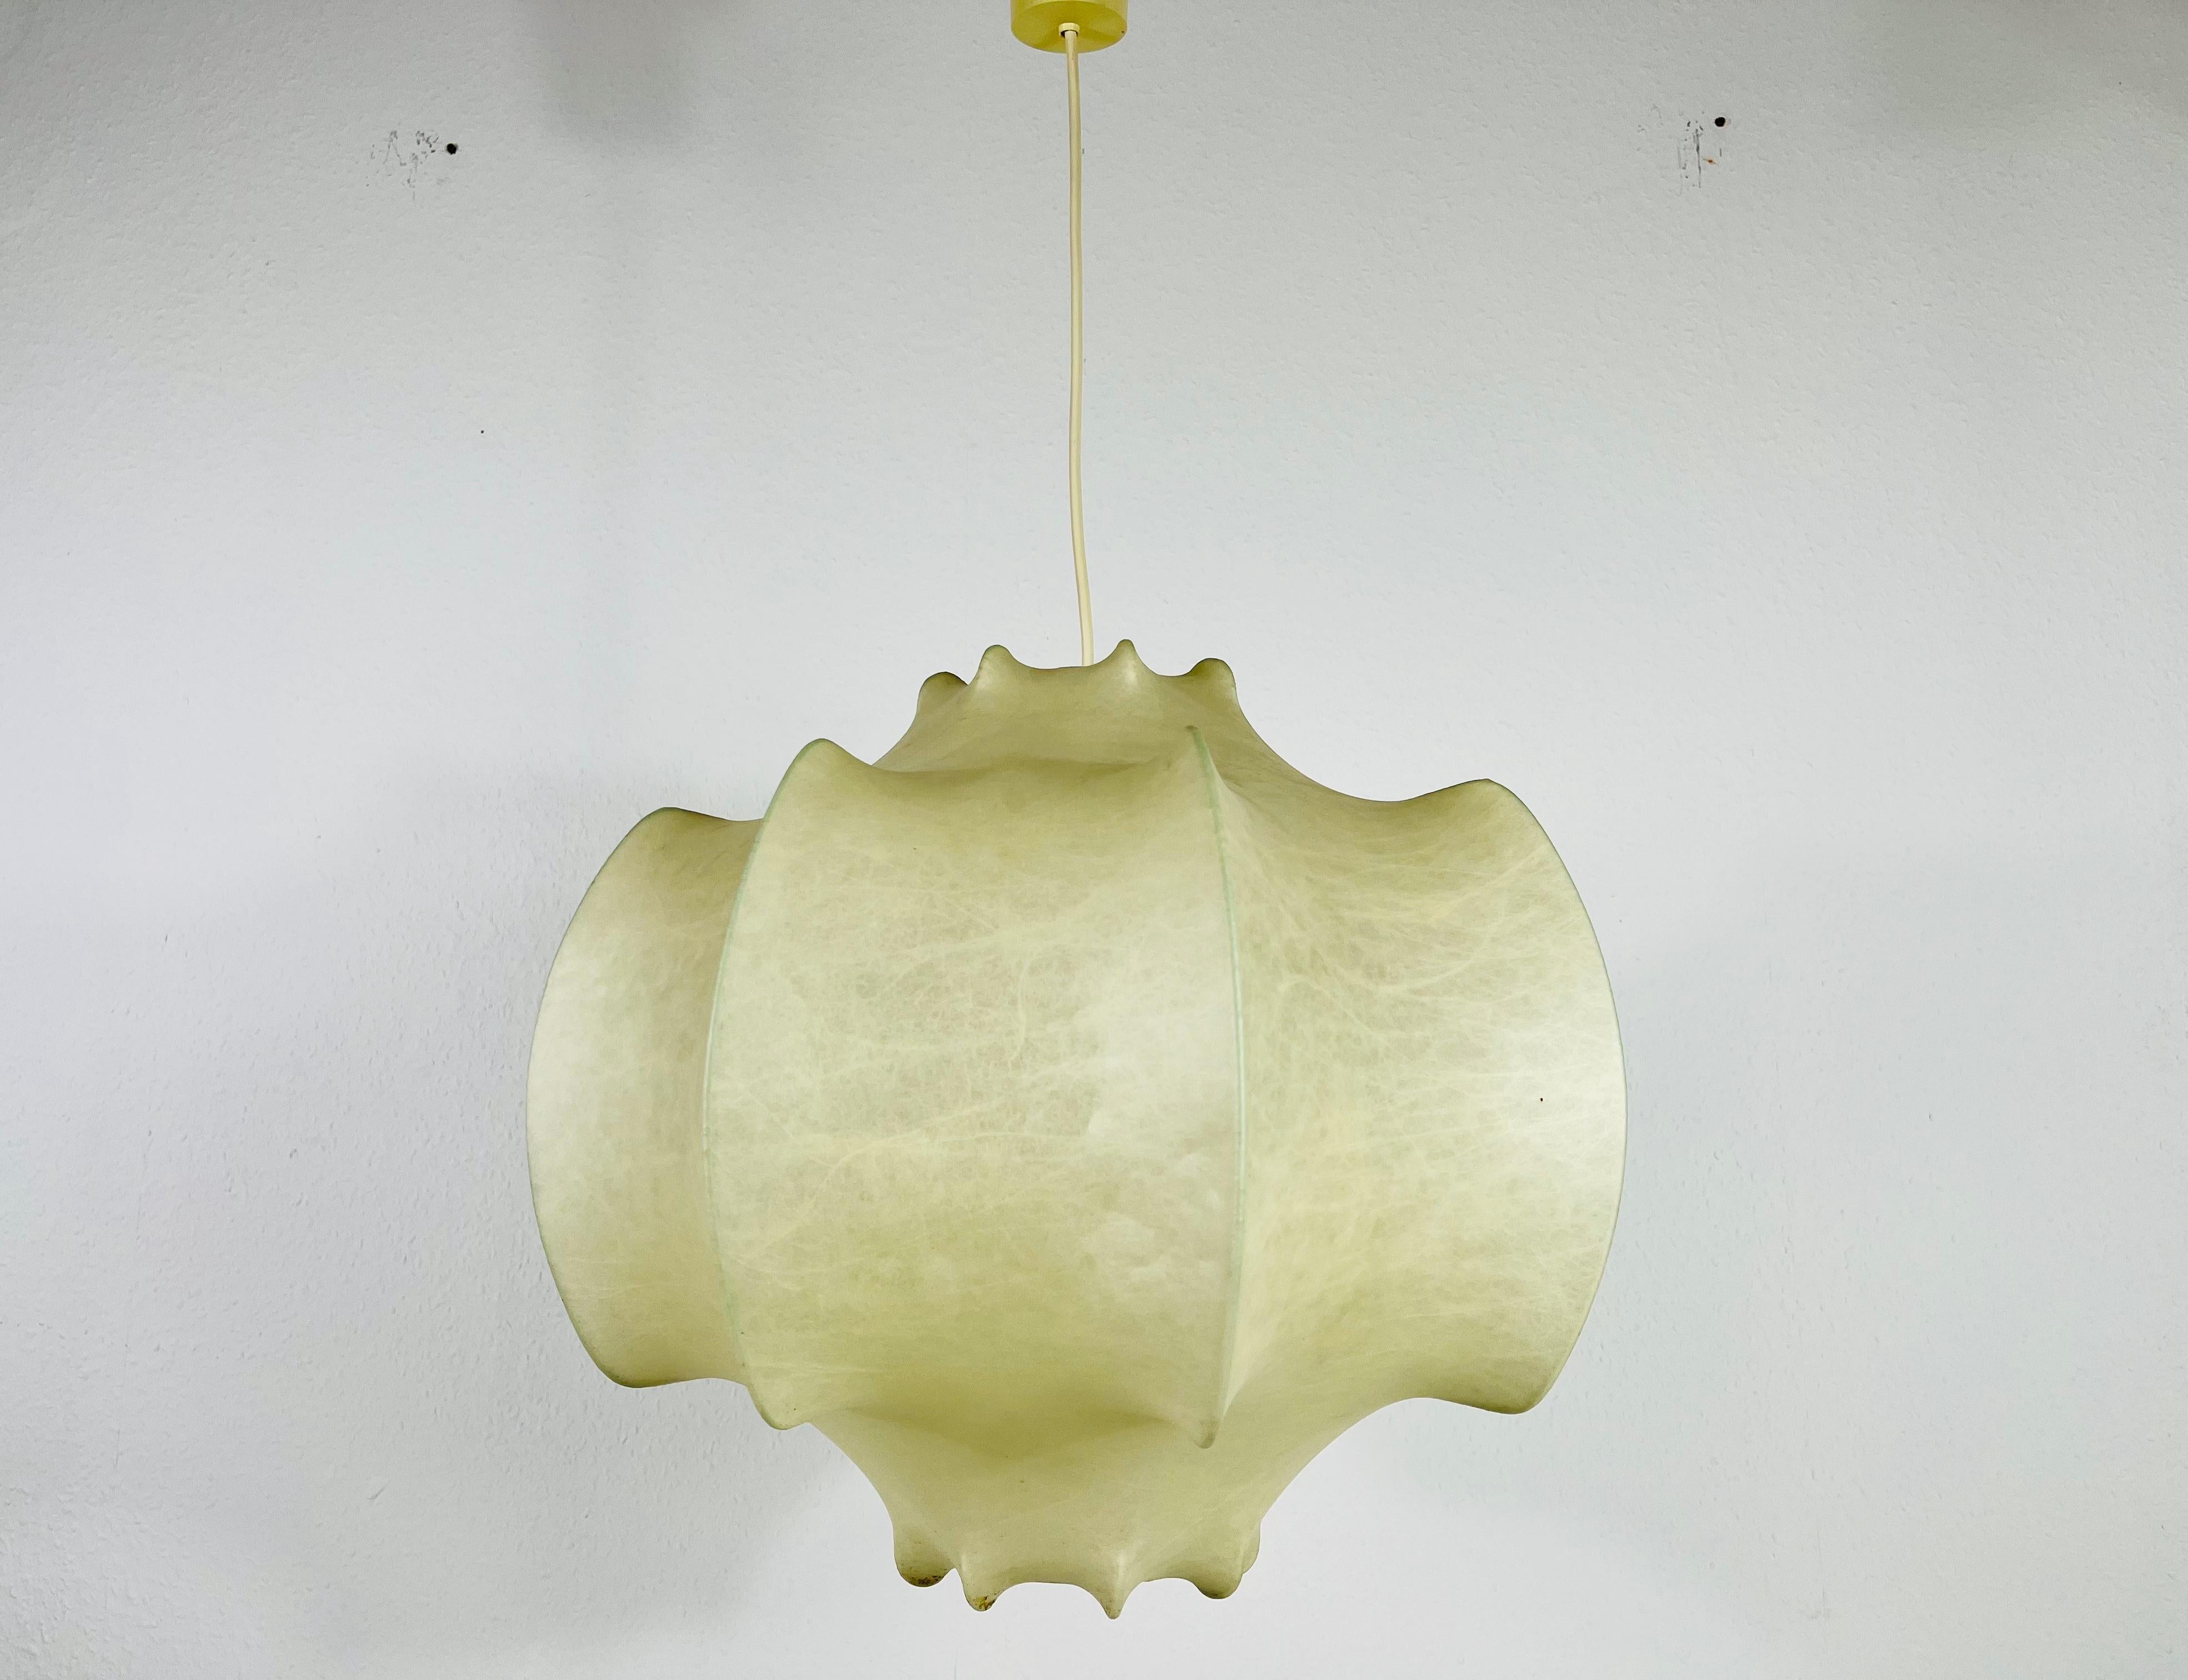 Large Viscontea pendant lamp made in Italy in the 1960s. The hanging lamp has been designed by Achille and Pier Giacomo Castiglioni for Flos. The lamp shade is of original resin.

Measures: 

Height of shade 37 cm

Total height up to 80